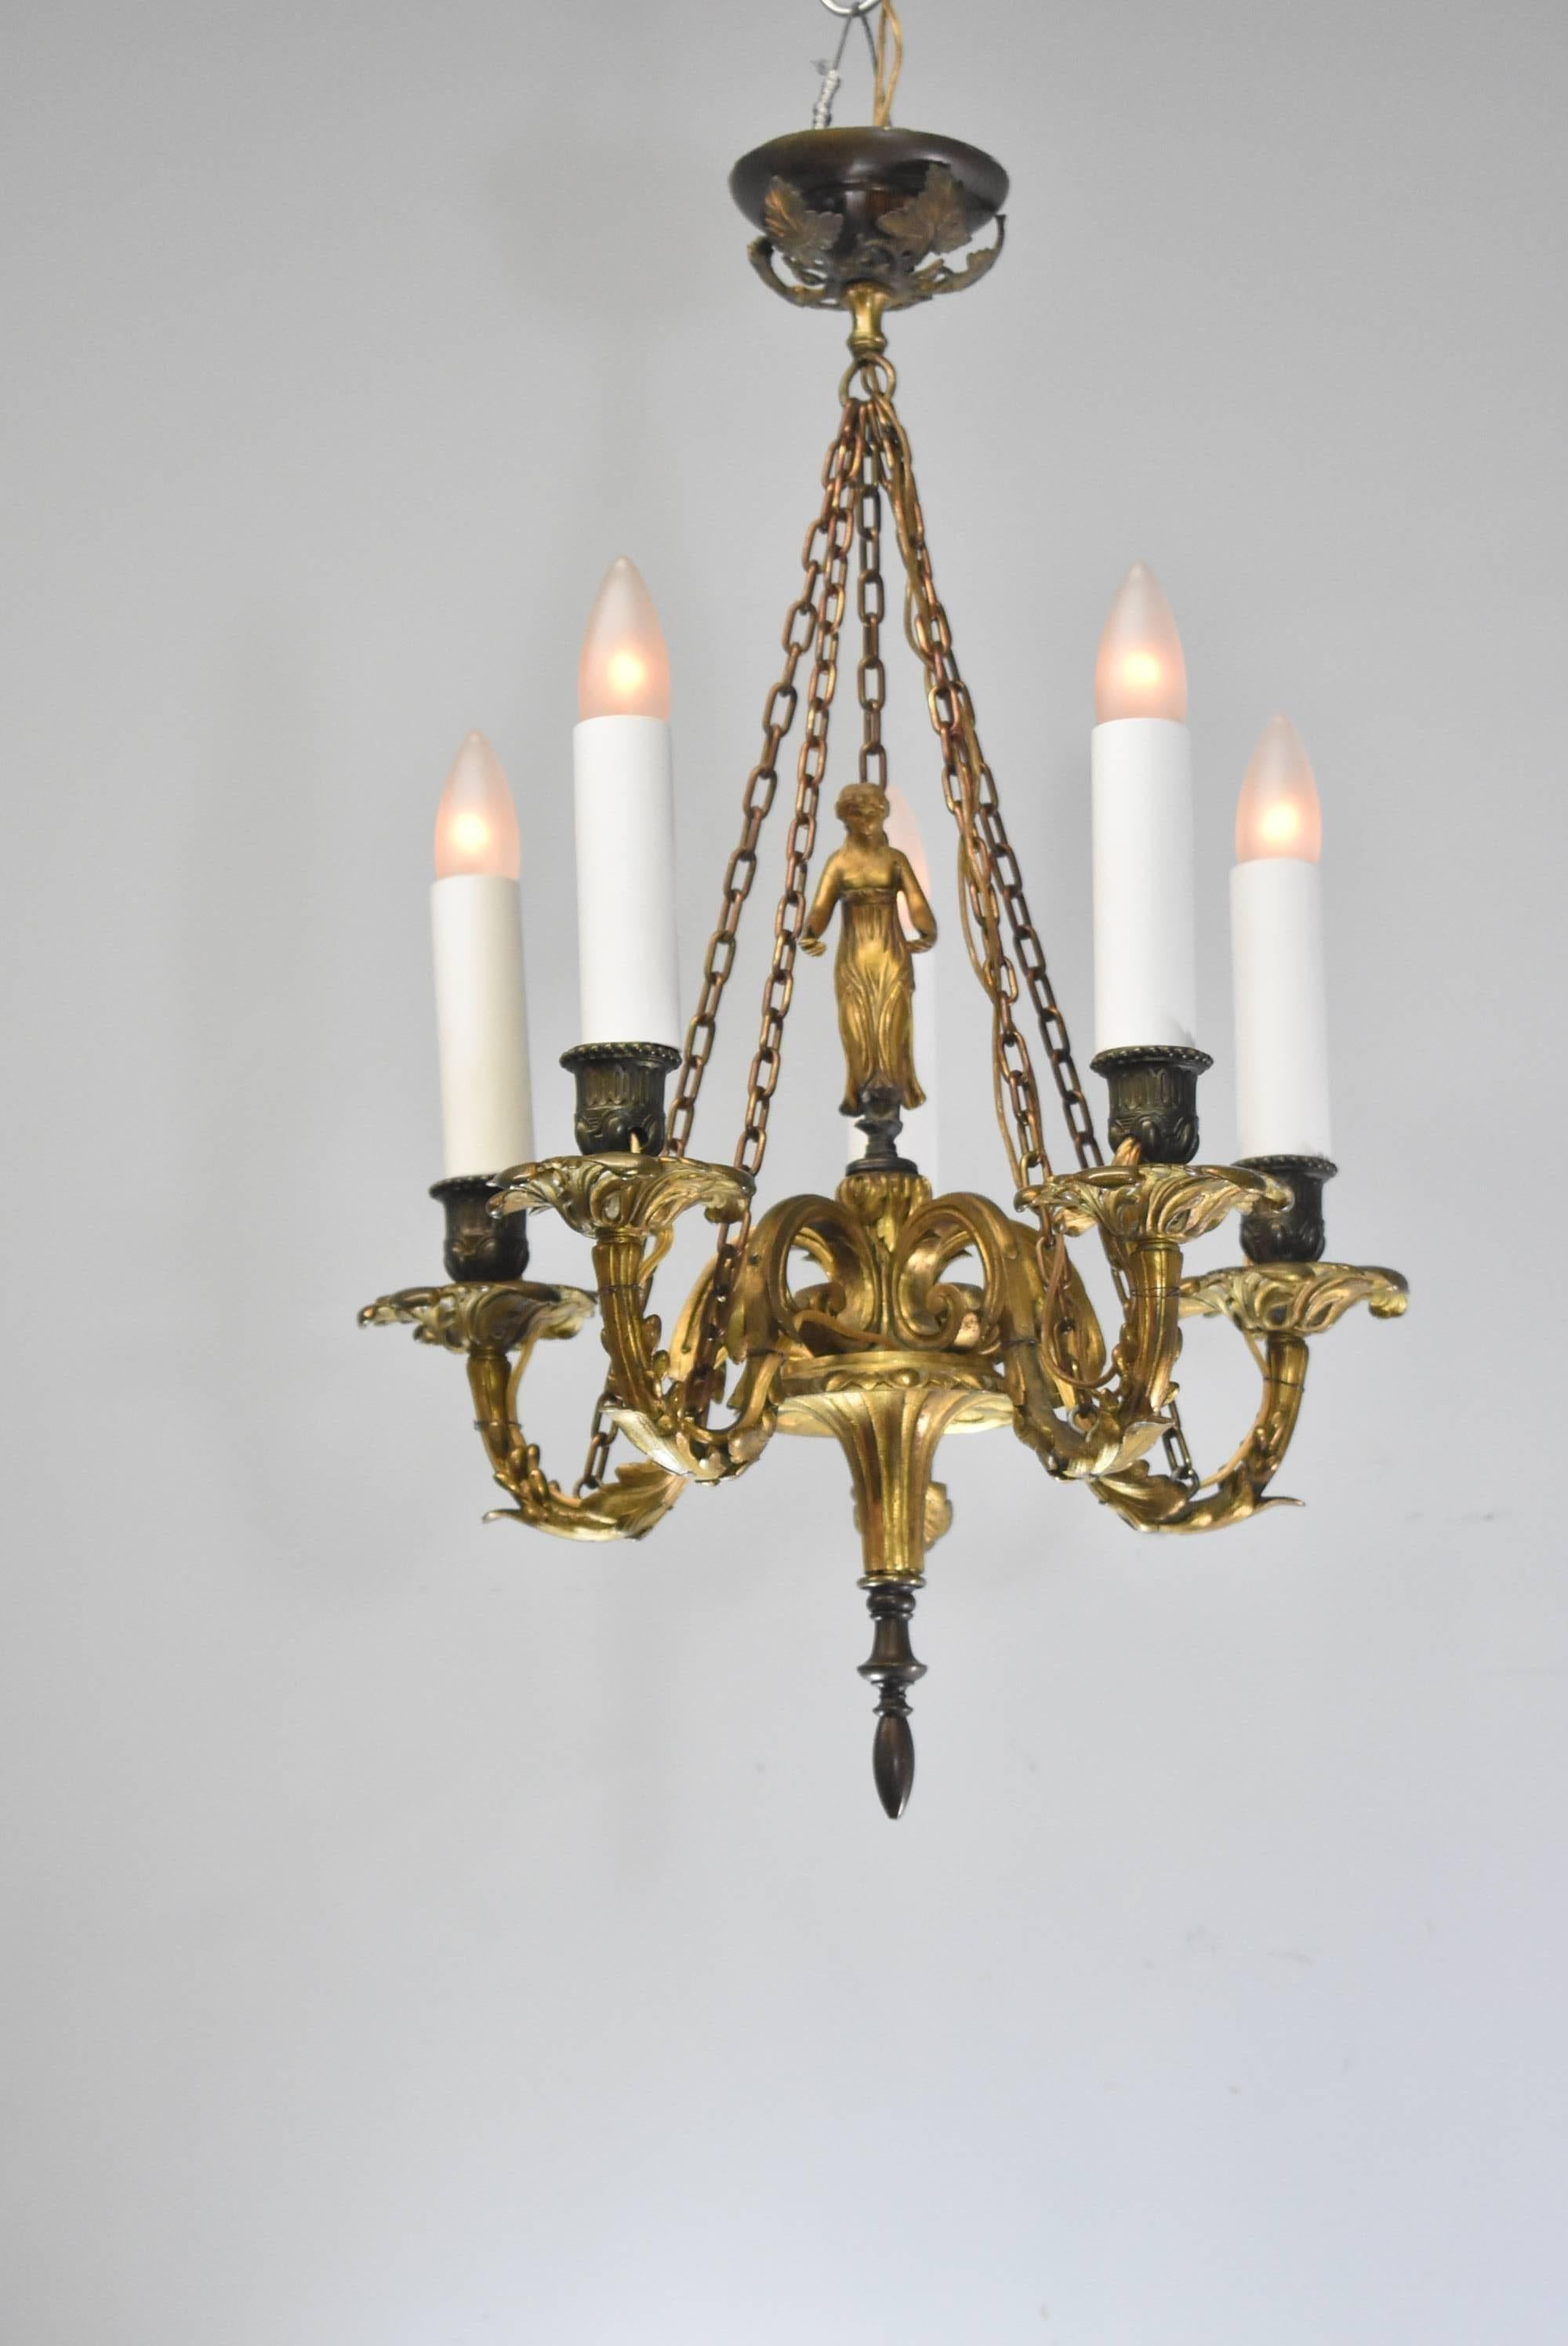 20th Century Small-Scale French Bronze Five-Arm Chandelier with Female Figure